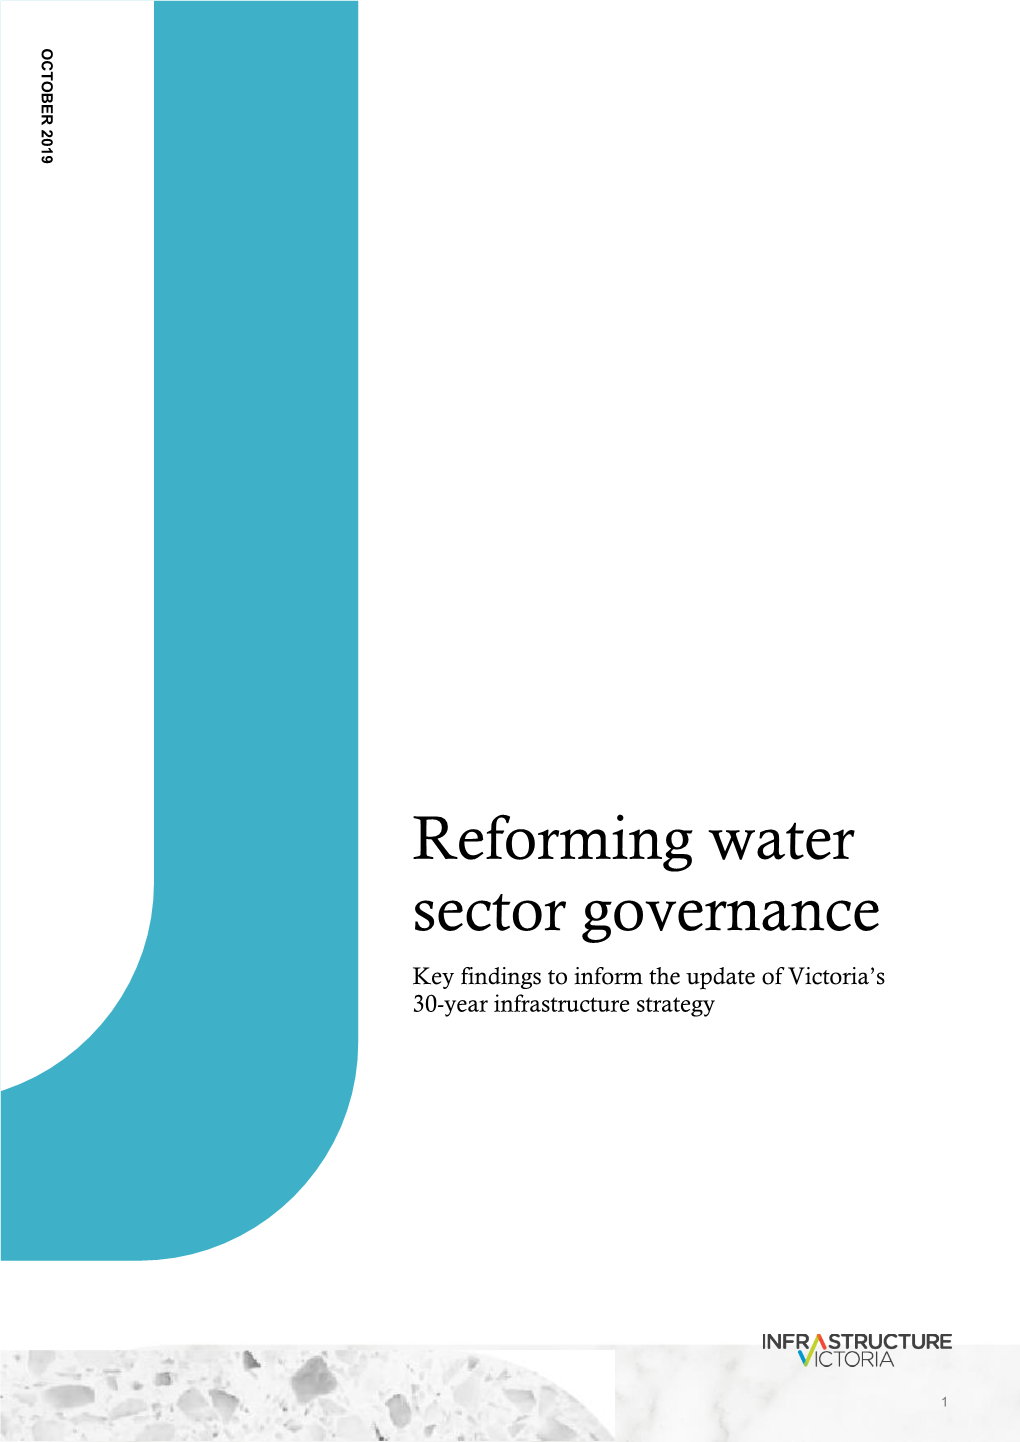 Reforming Water Sector Governance Key Findings to Inform the Update of Victoria’S 30-Year Infrastructure Strategy